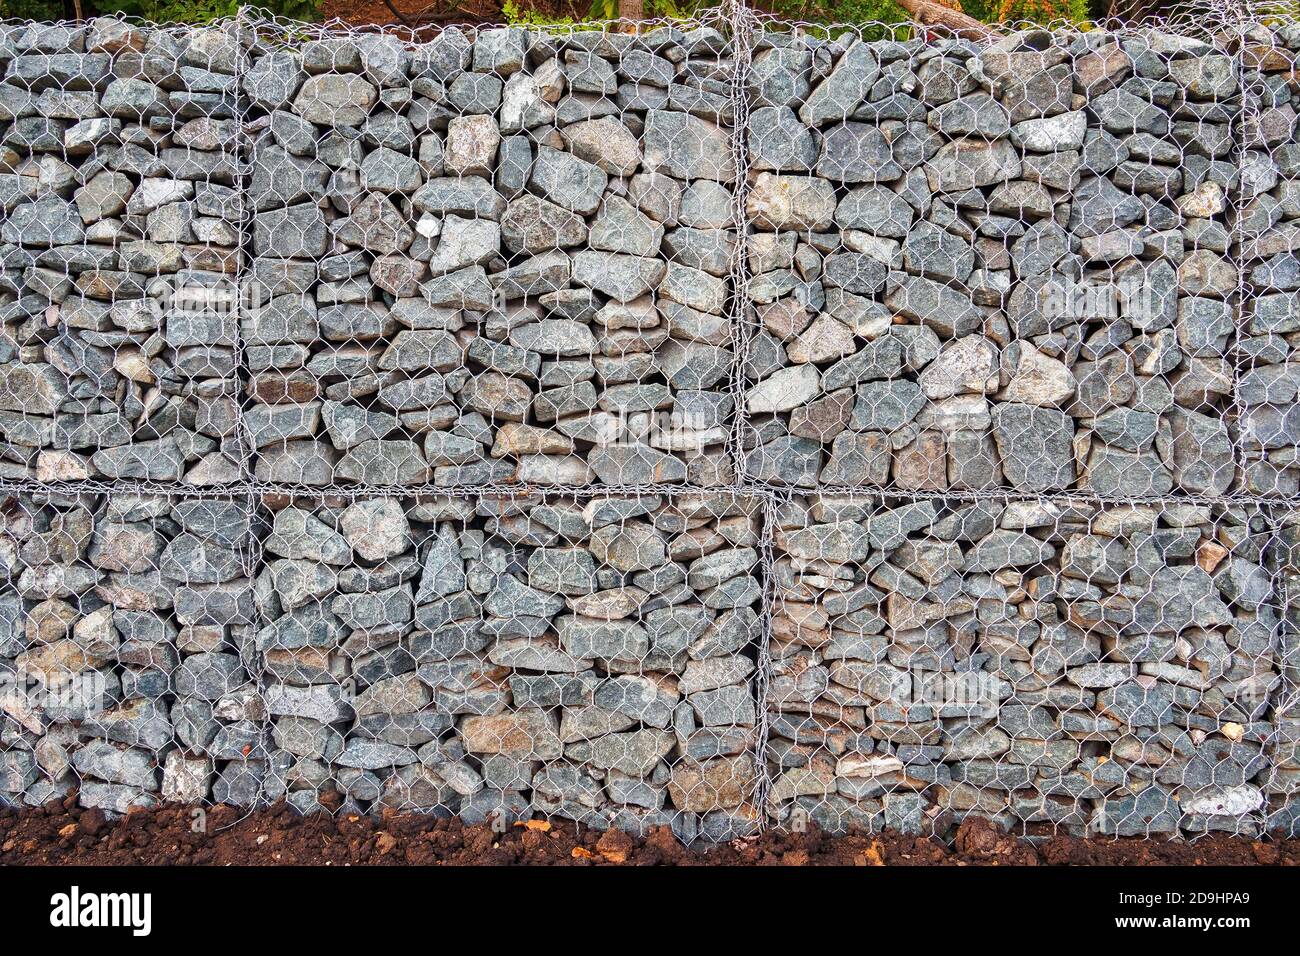 Mesh and stone fence, gabion for use in civil engineering, road building, military applications and landscaping. Stock Photo